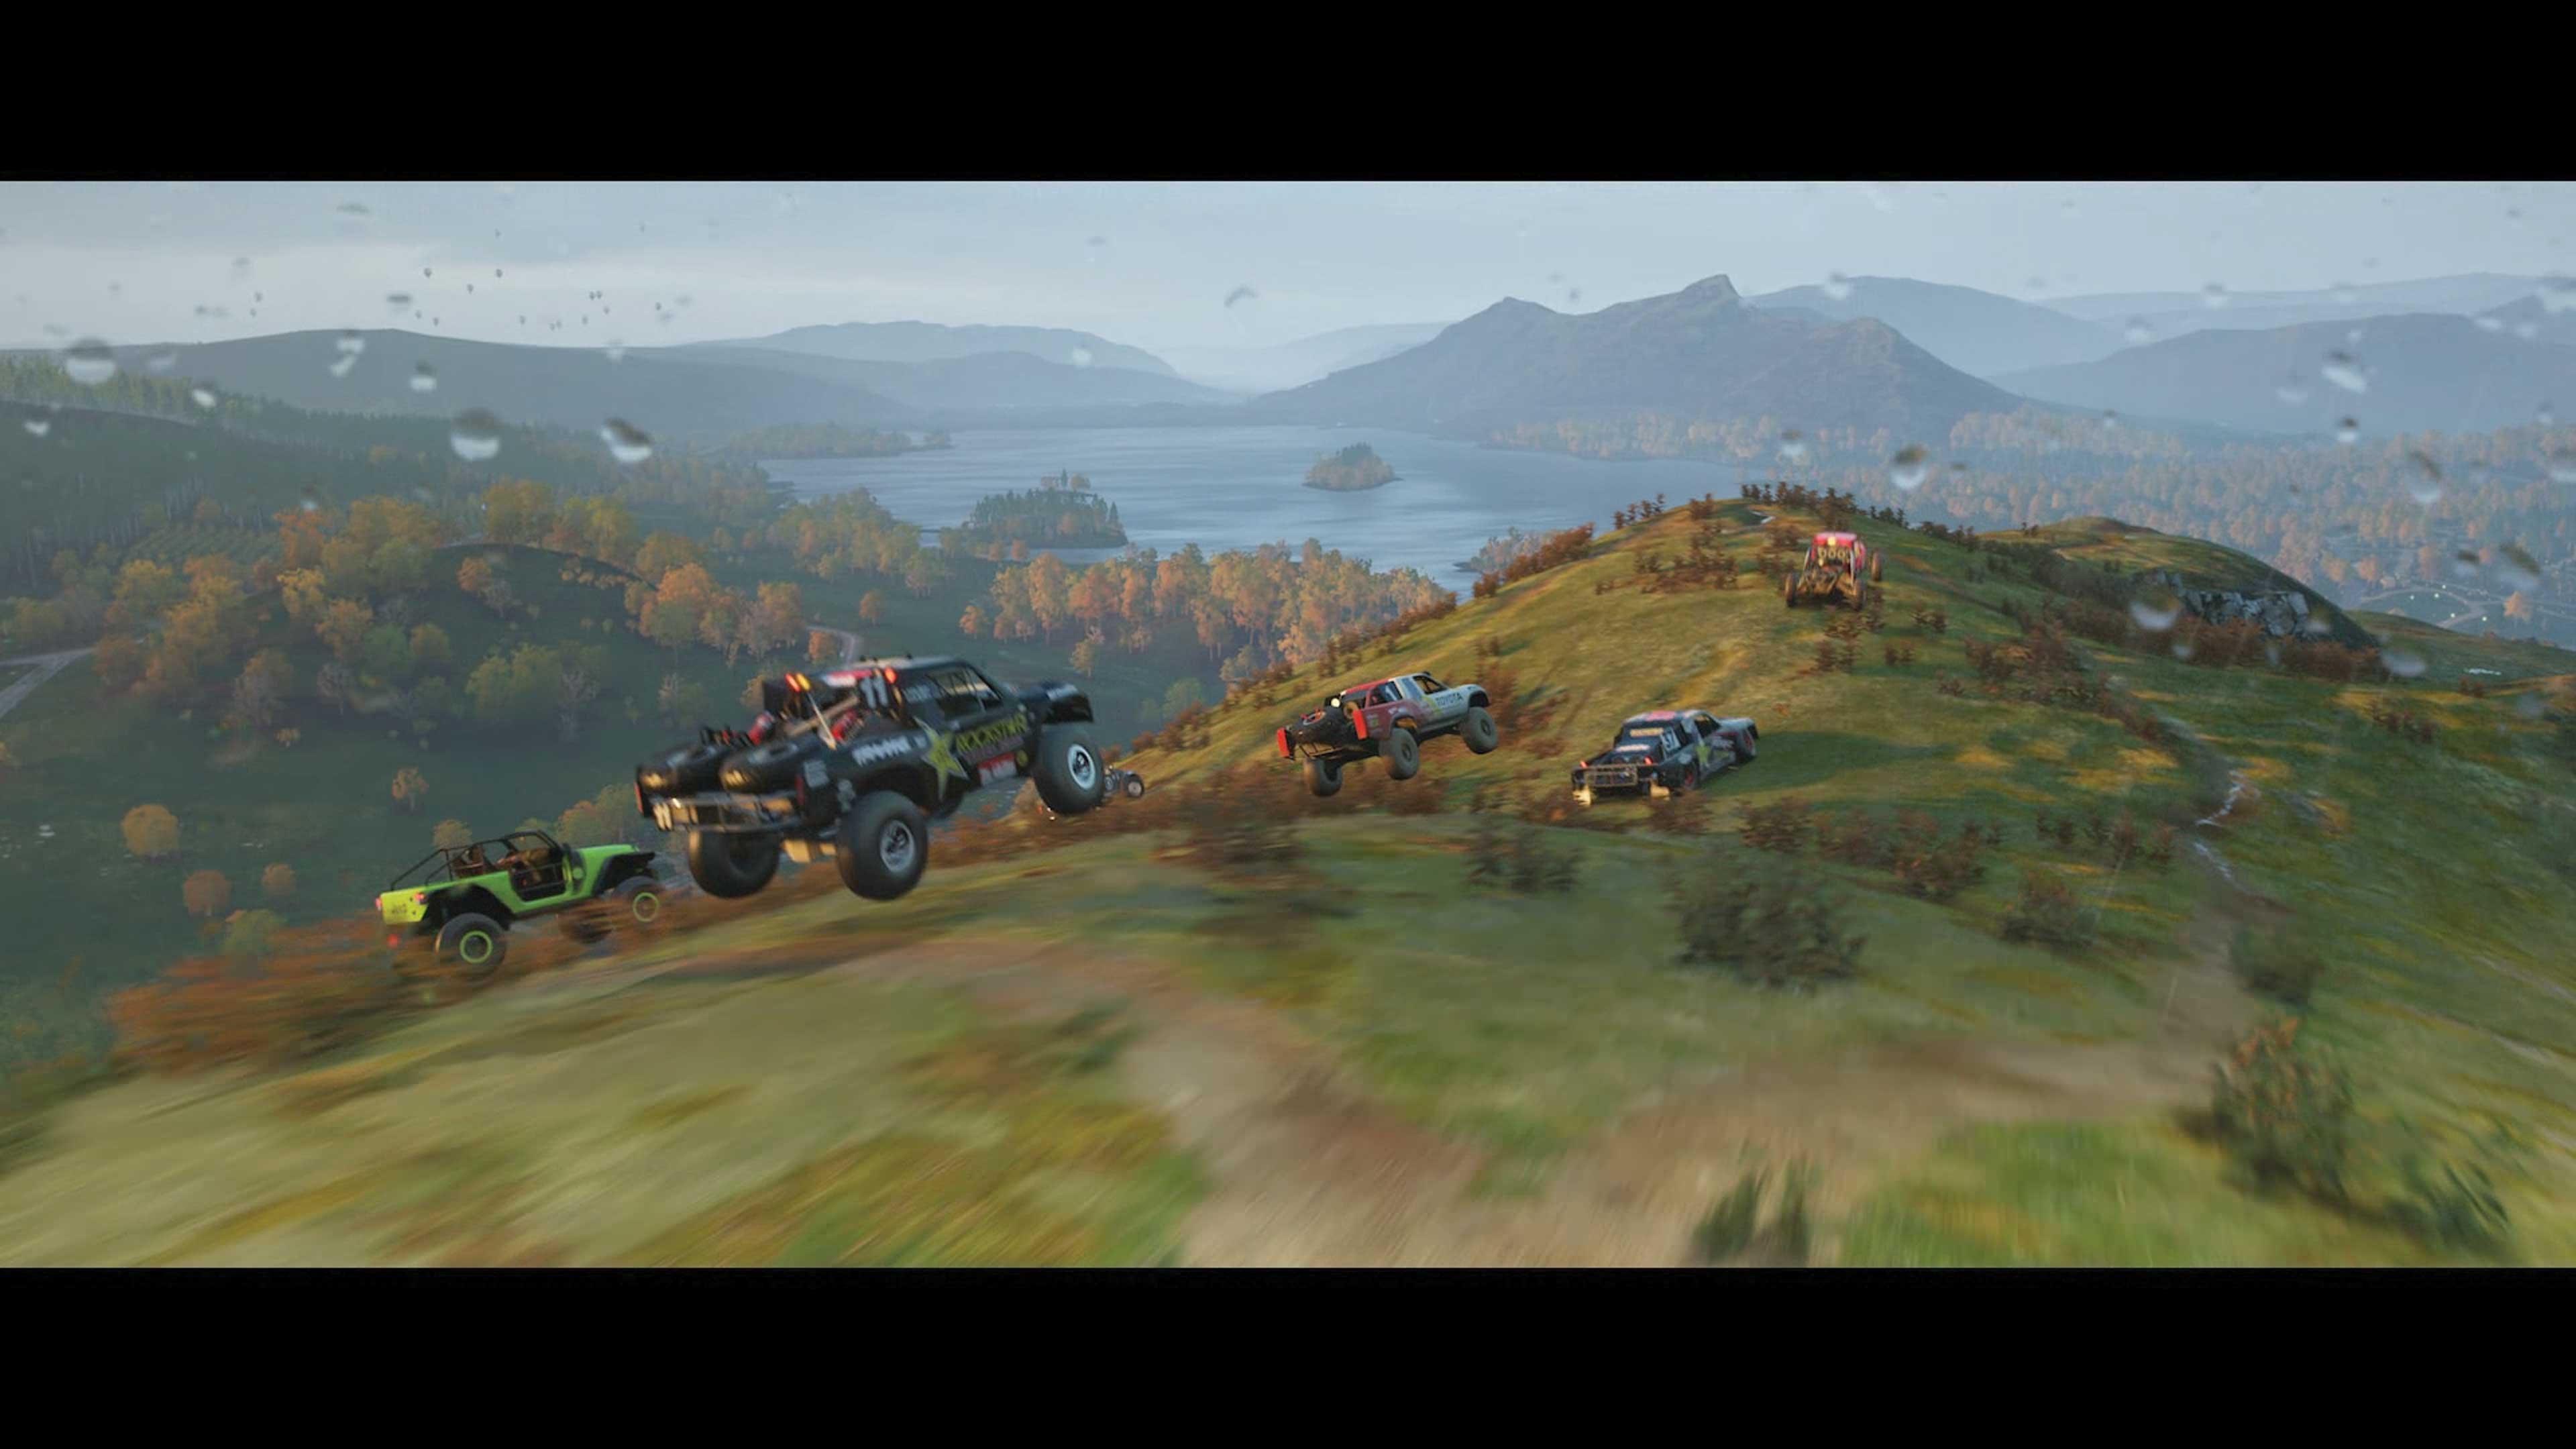 forza horizon 4 demo for xbox one release date